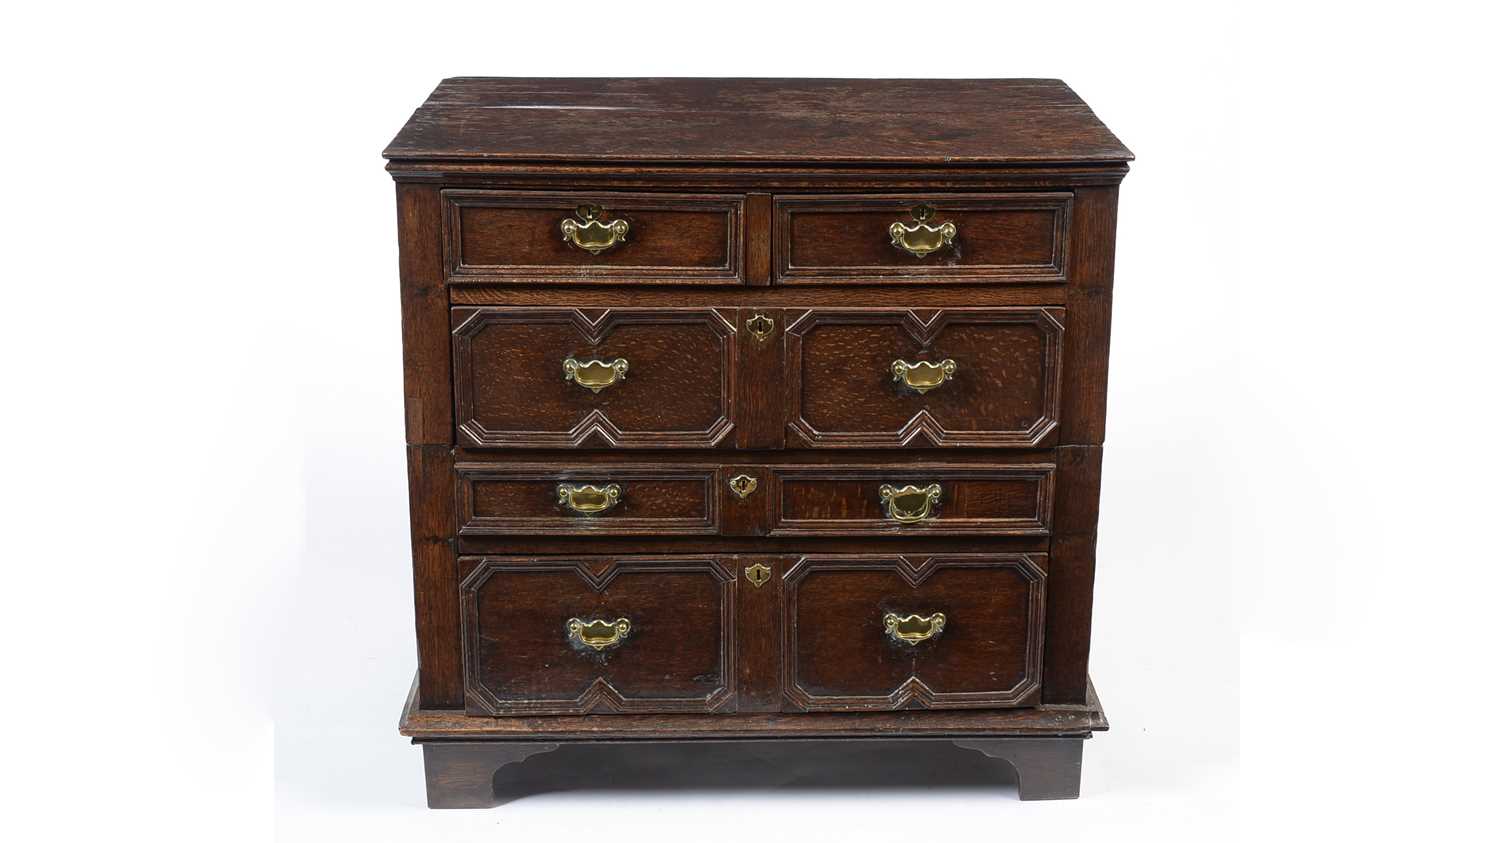 A late 17th century oak chest of drawers